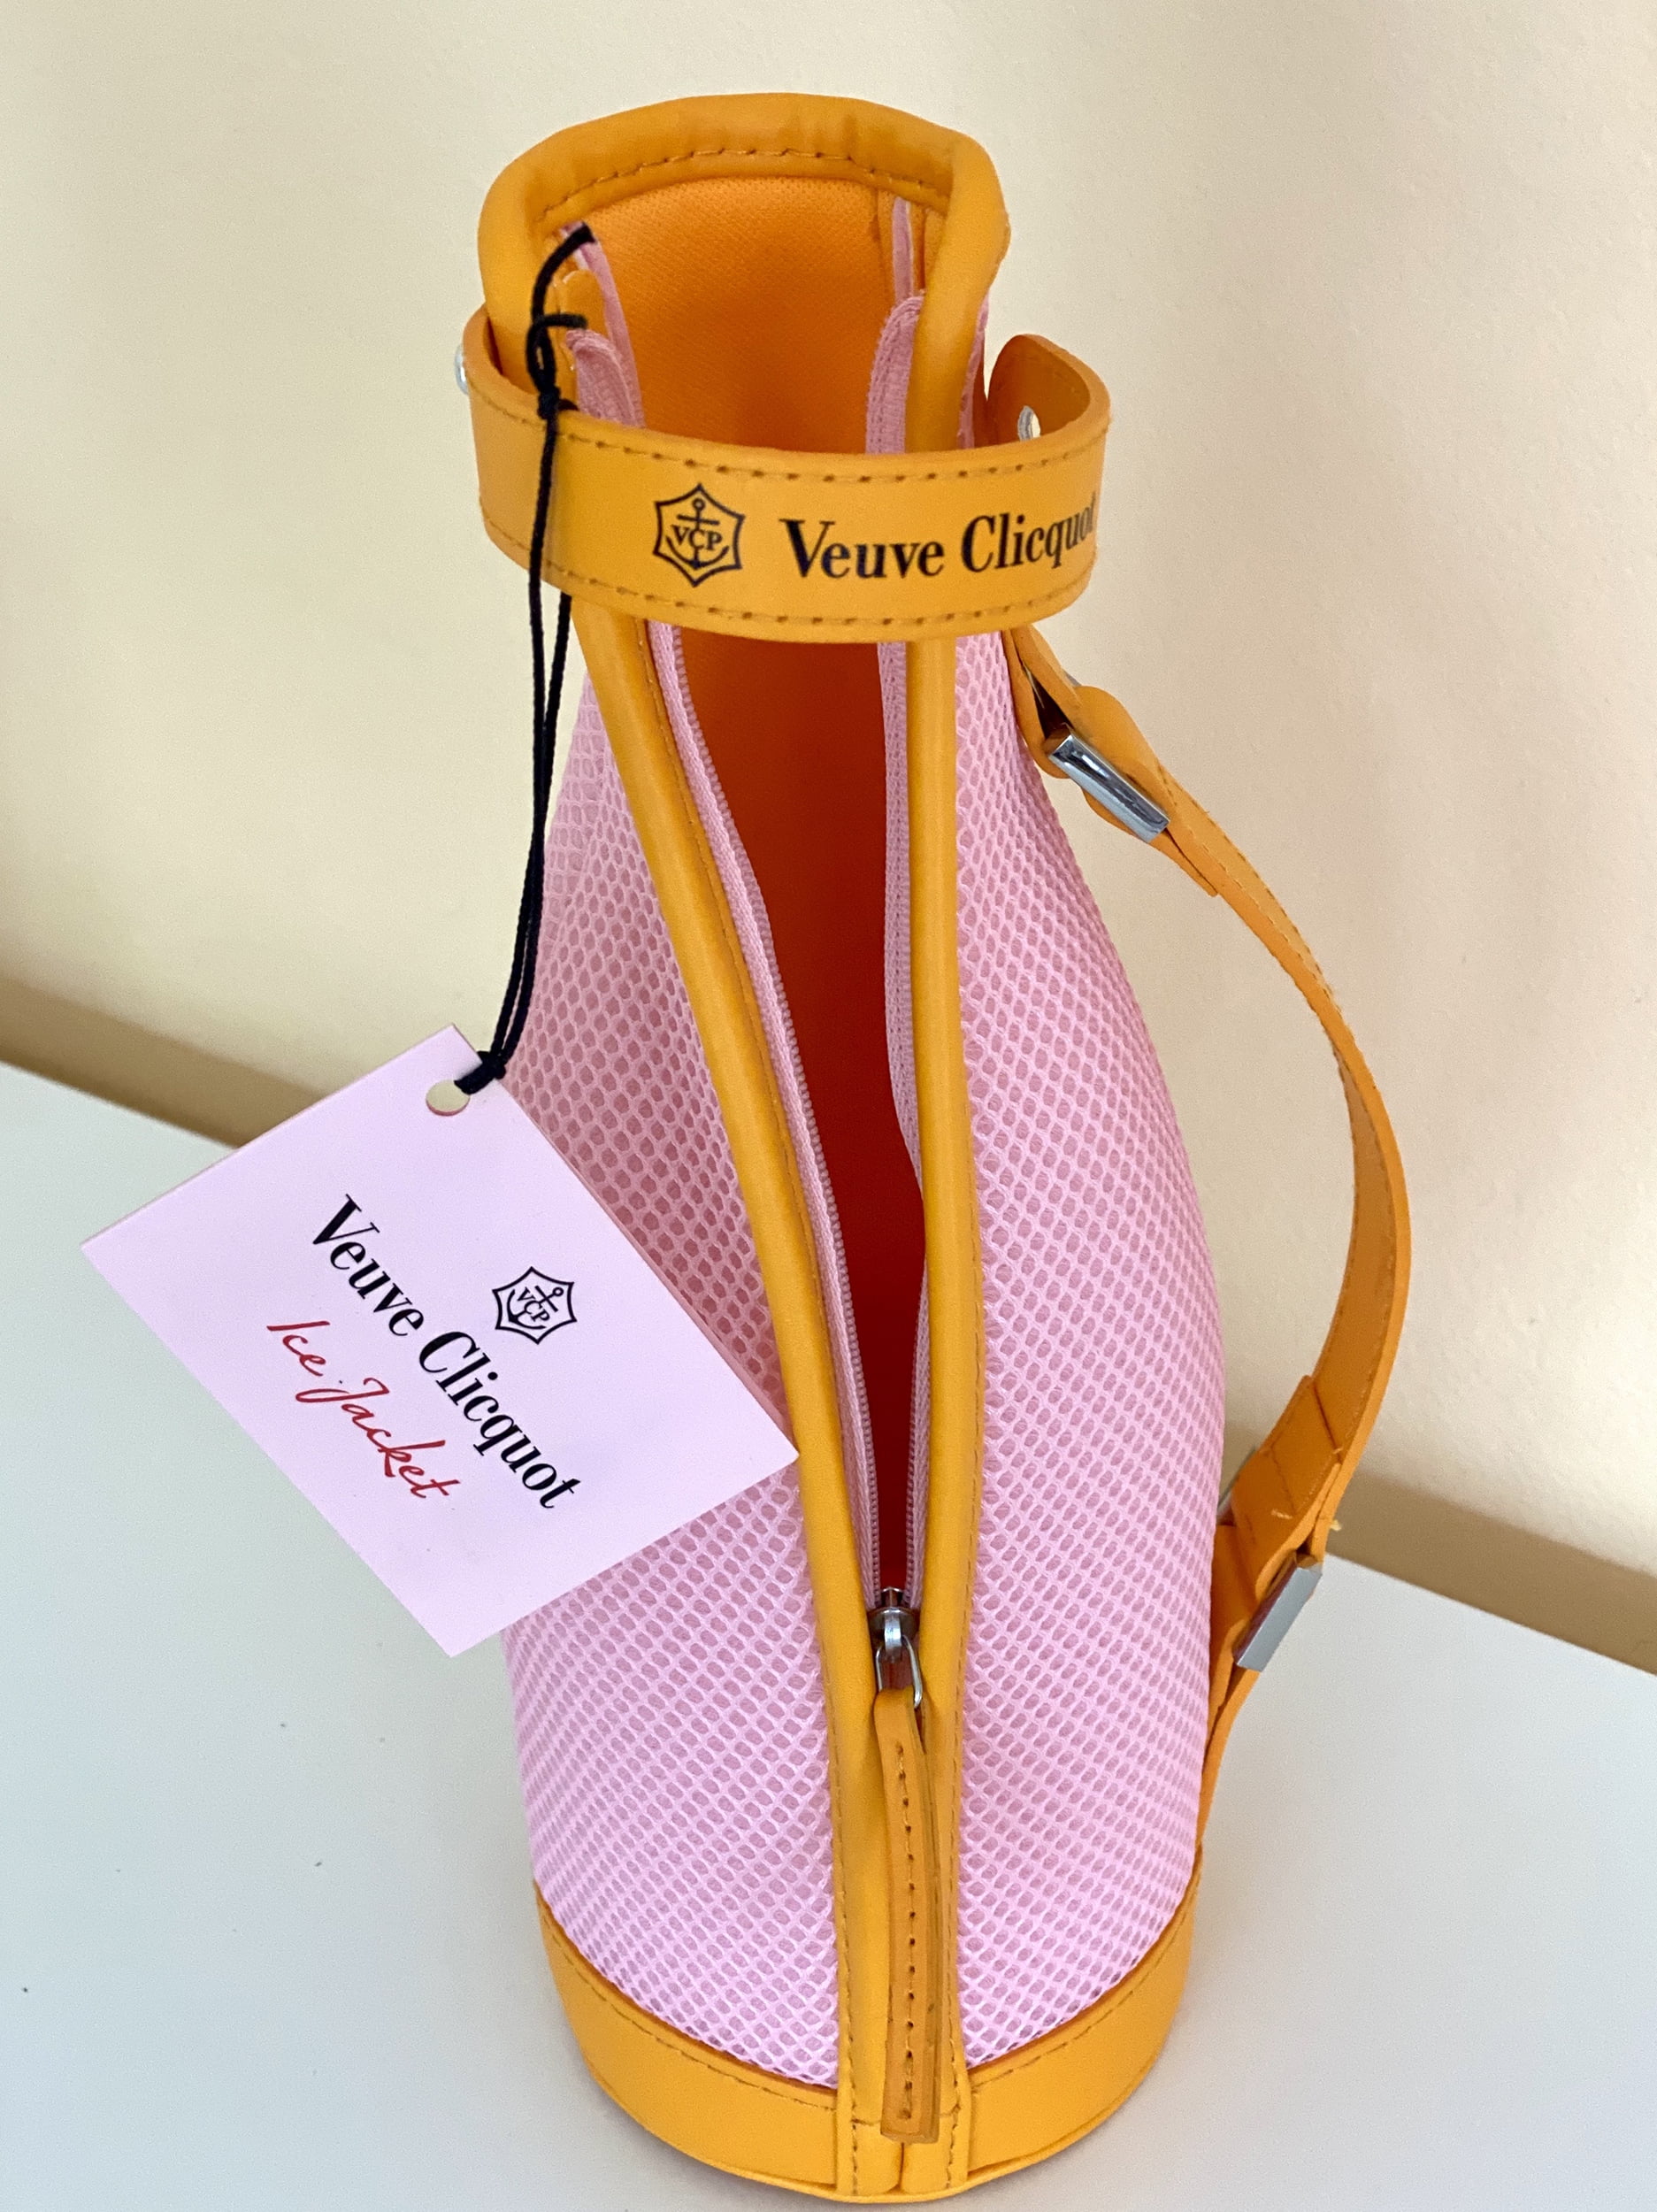 Veuve Clicquot - Brut Yellow Label Ice Jacket Gift NV - Joe Canal's  Lawrenceville